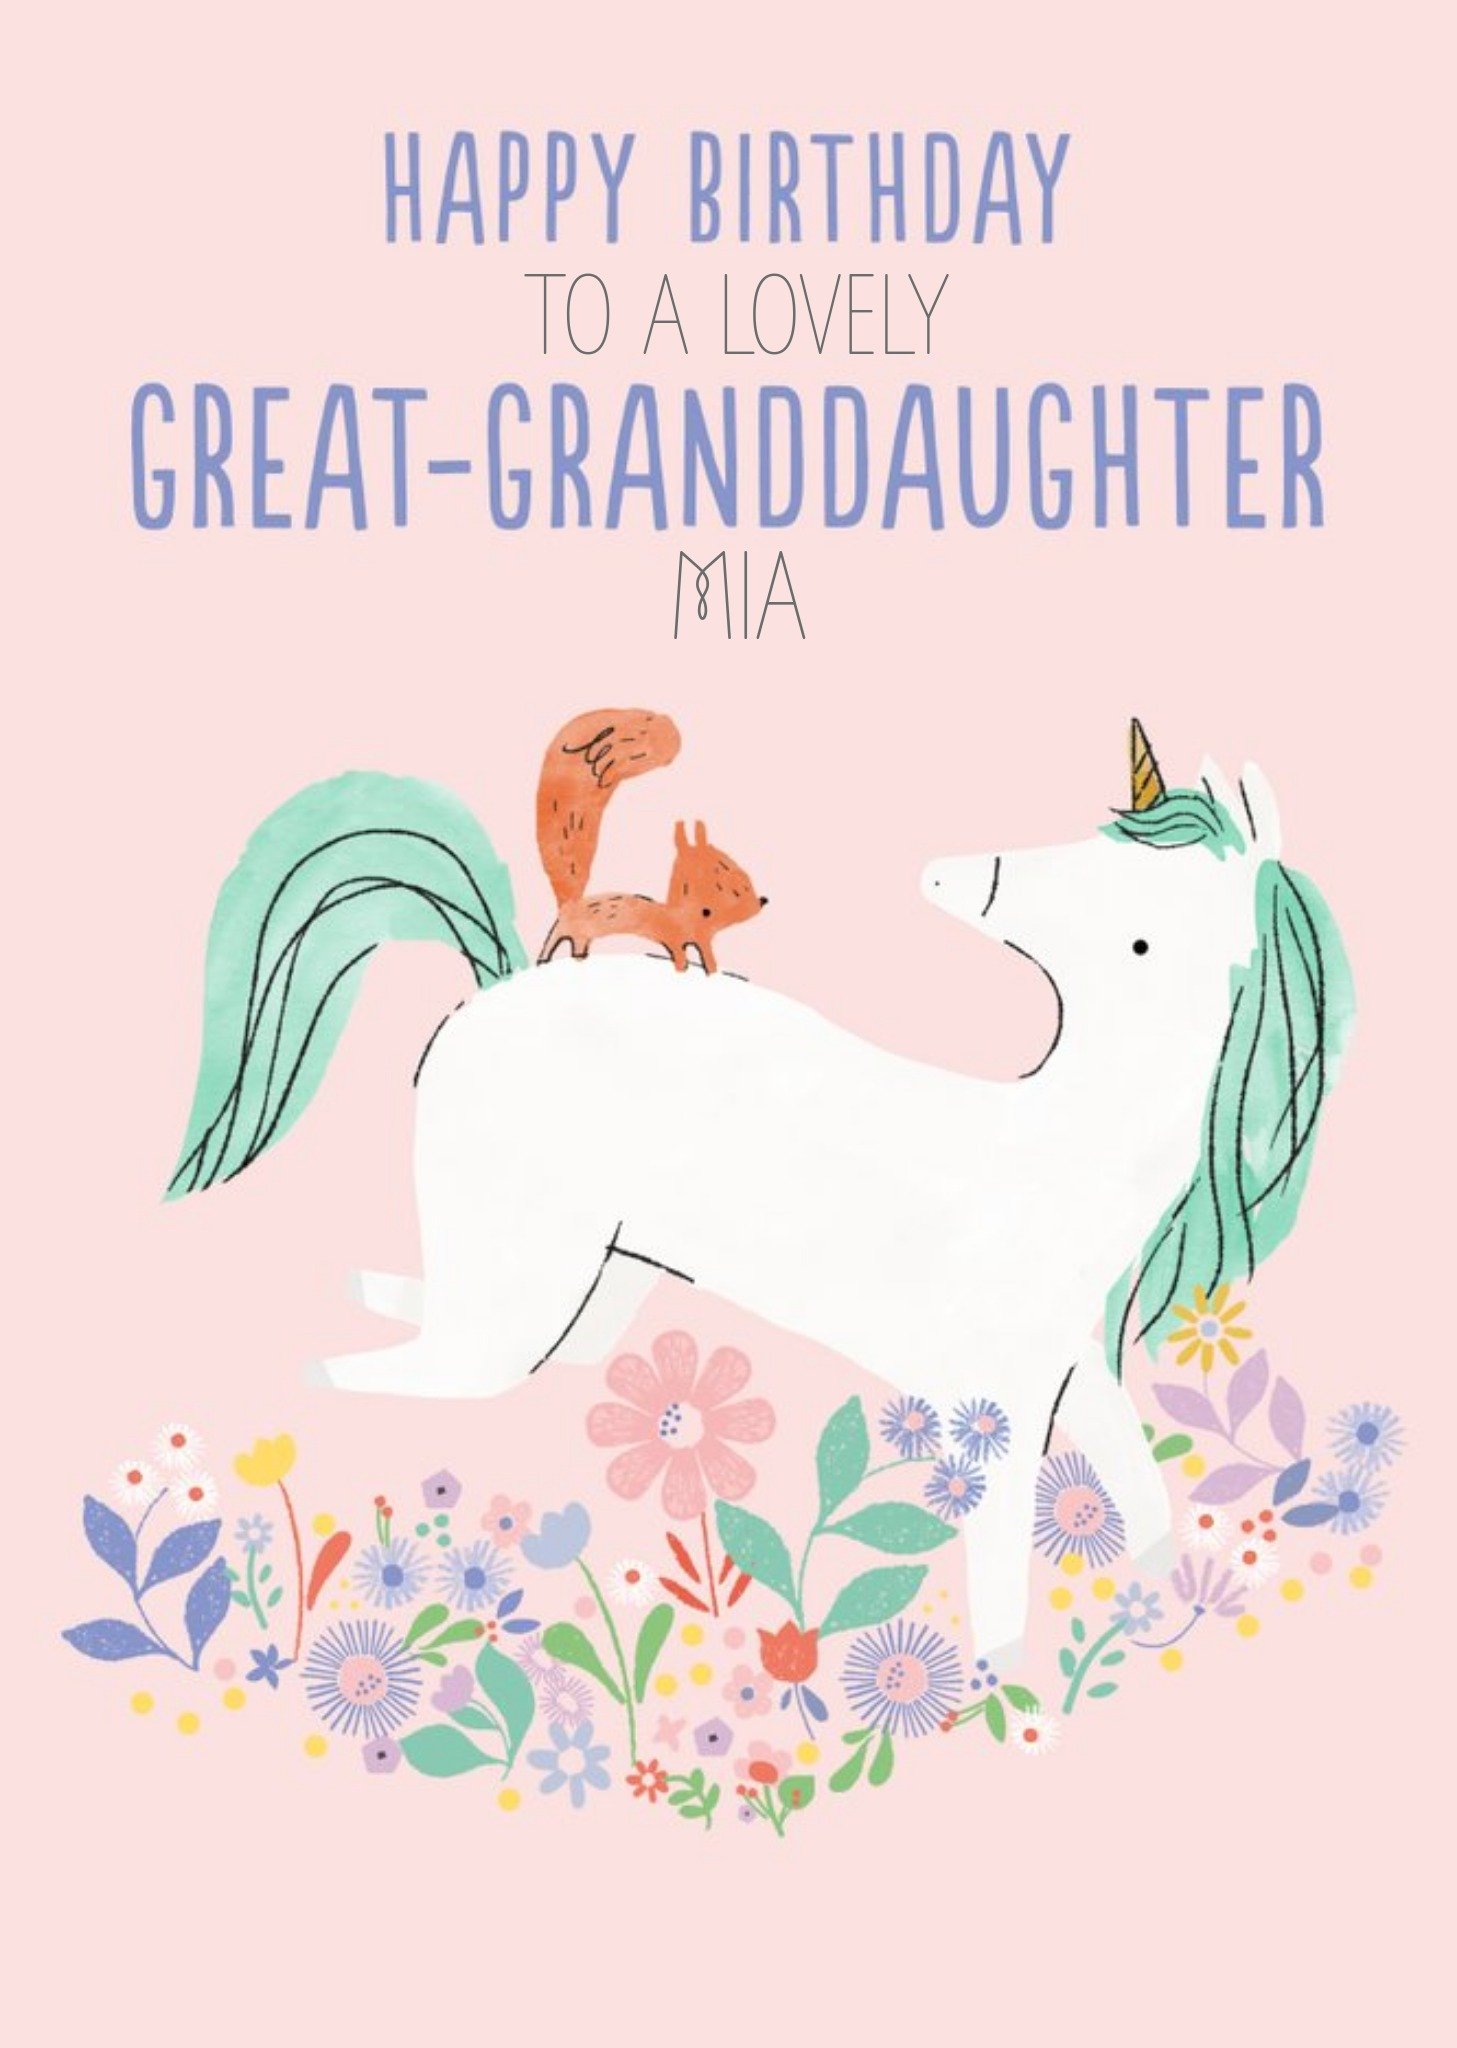 Moonpig Cute Illustrative Unicorn And Squirrel Great-Granddaughter Birthday Card , Large